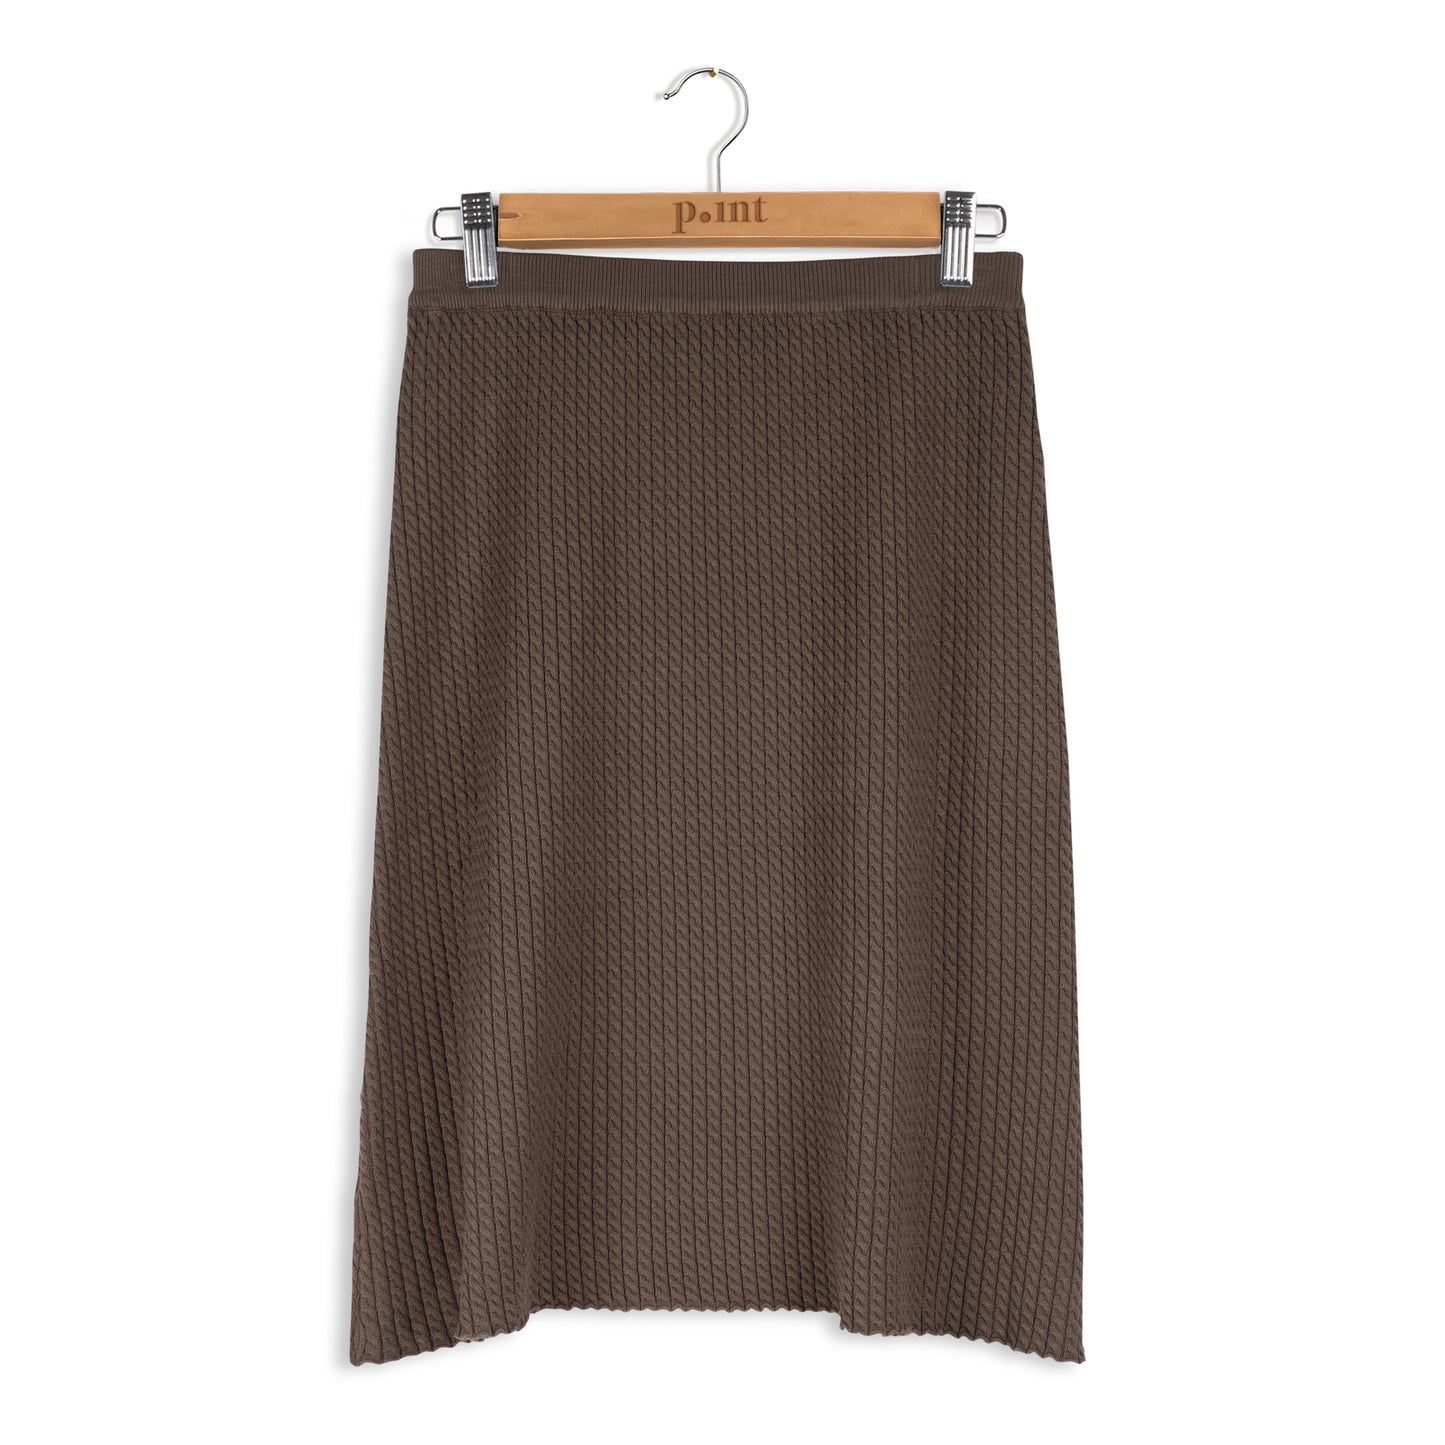 point cable aline skirt